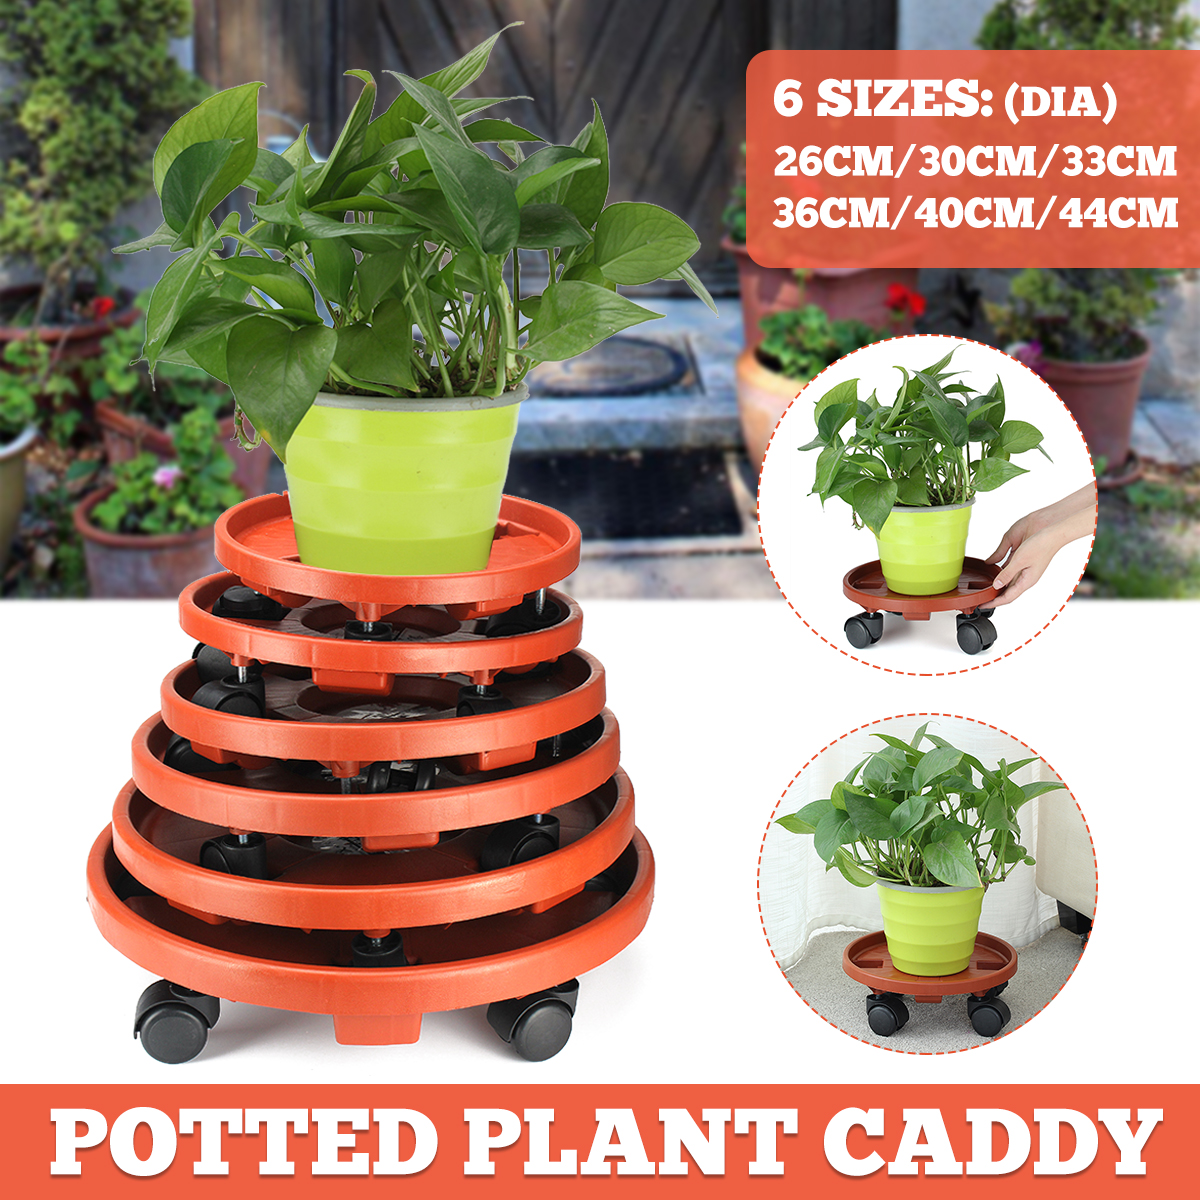 Flower-Pot-Rack-Holder-PP-Plant-Caddy-Round-Potted-Garden-Plant-Stand-With-Wheels-1780357-1